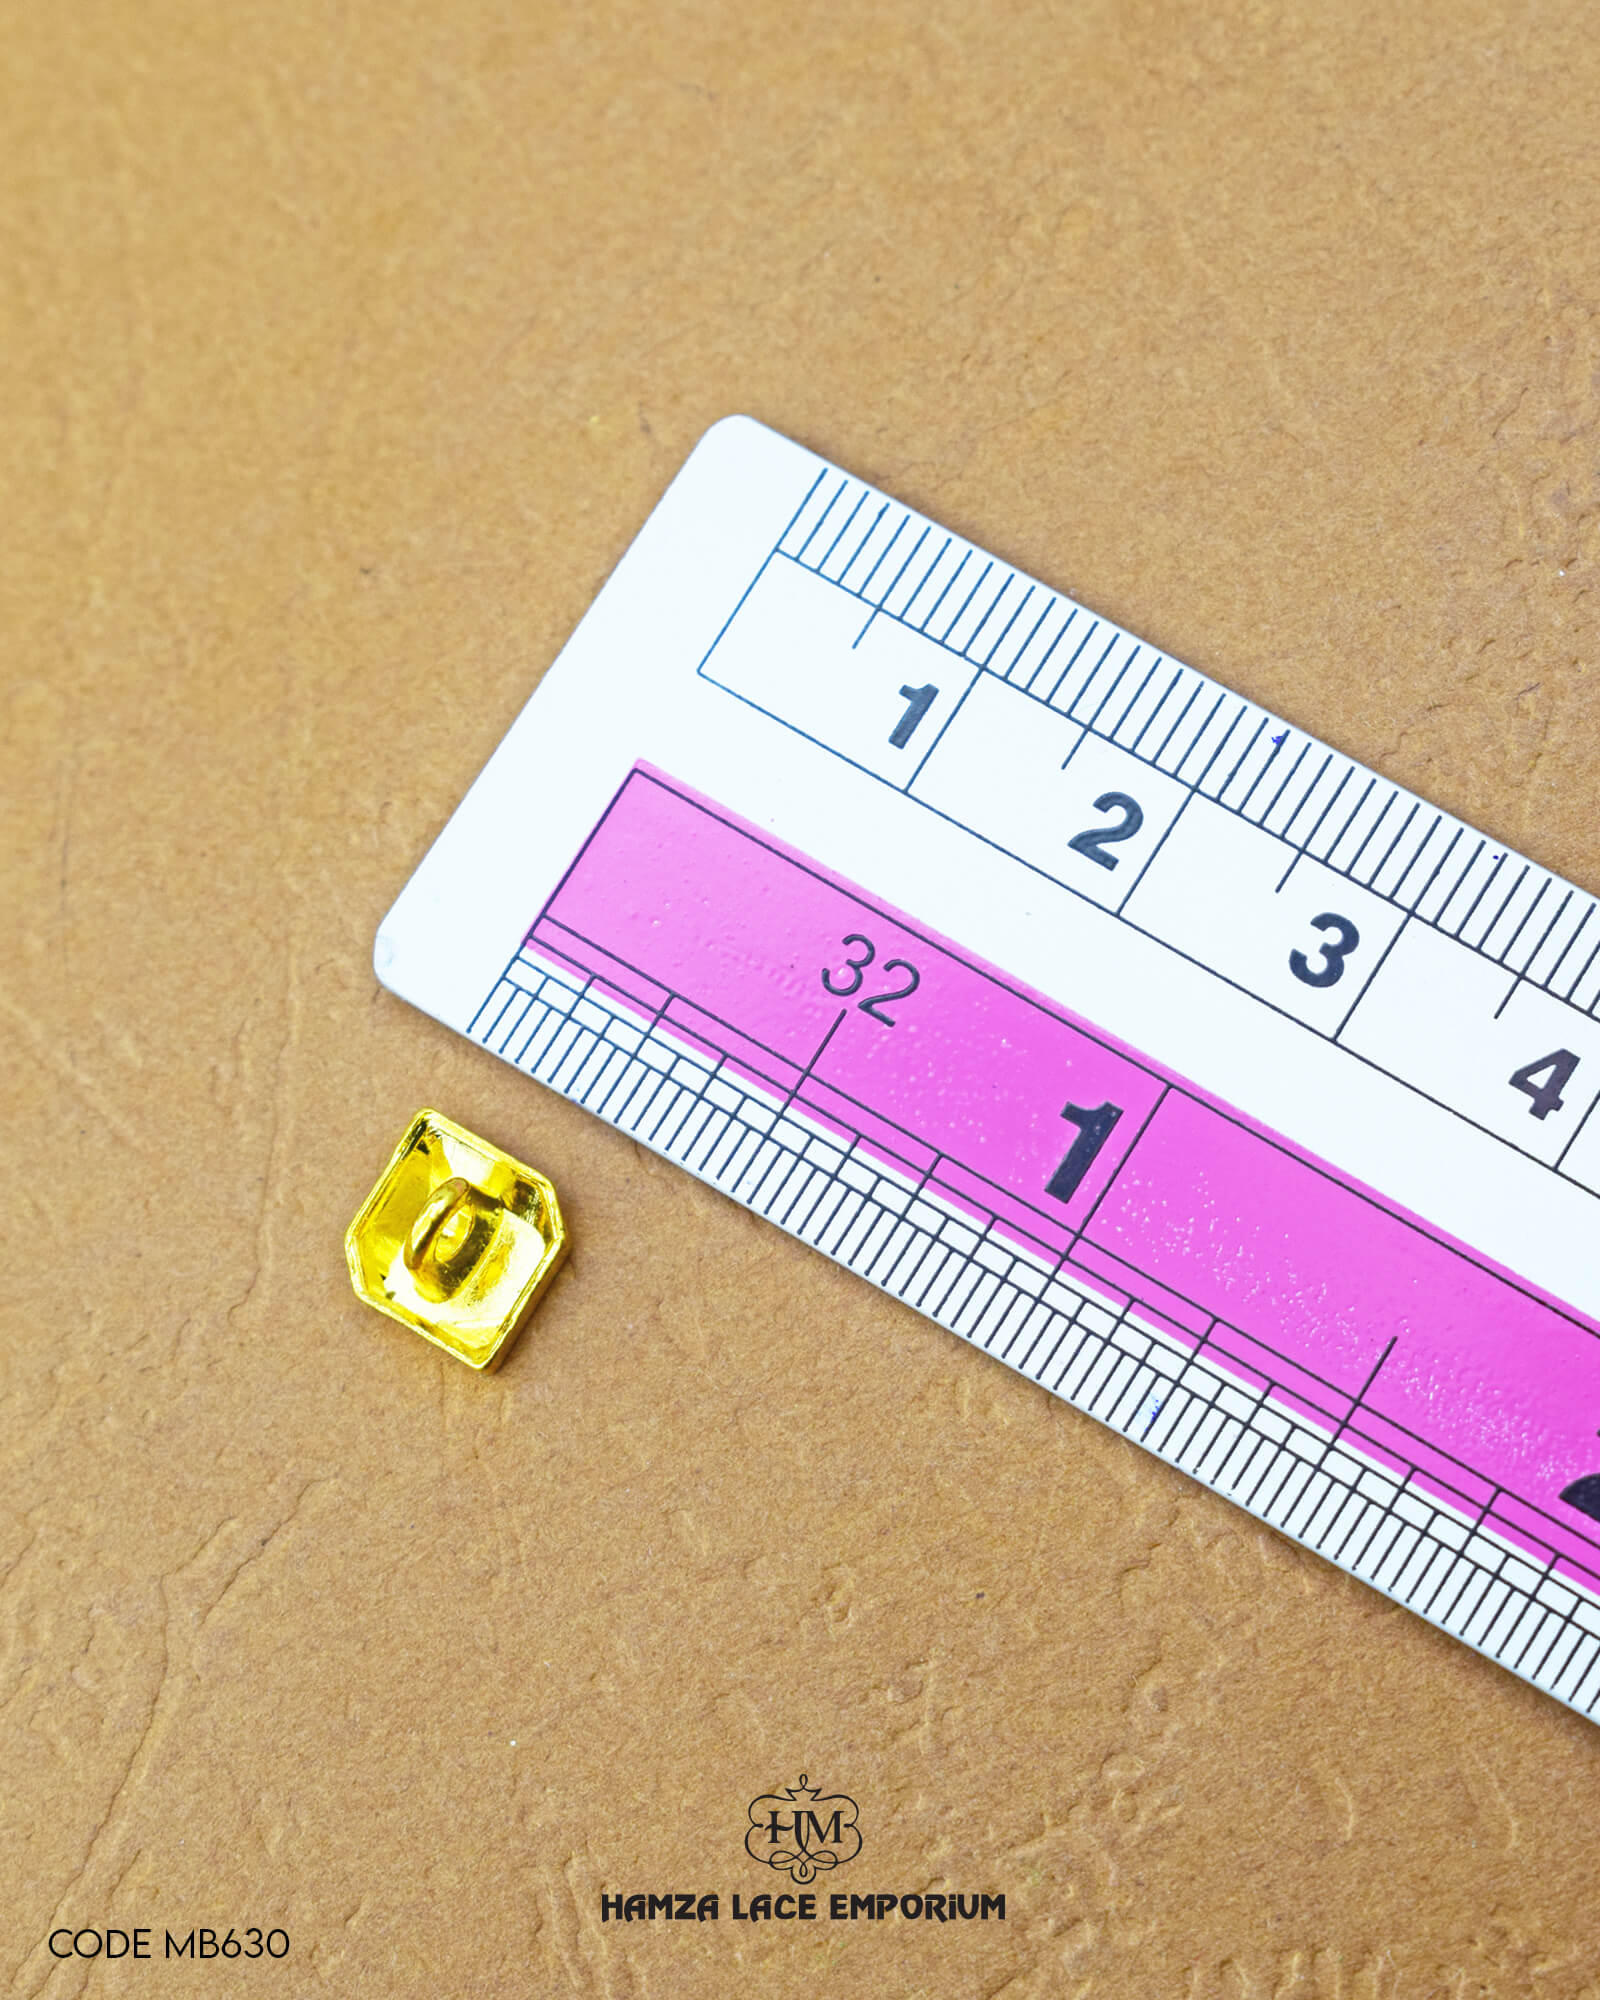 The dimensions of the 'Metal Suiting Button MB630' are determined using a ruler.